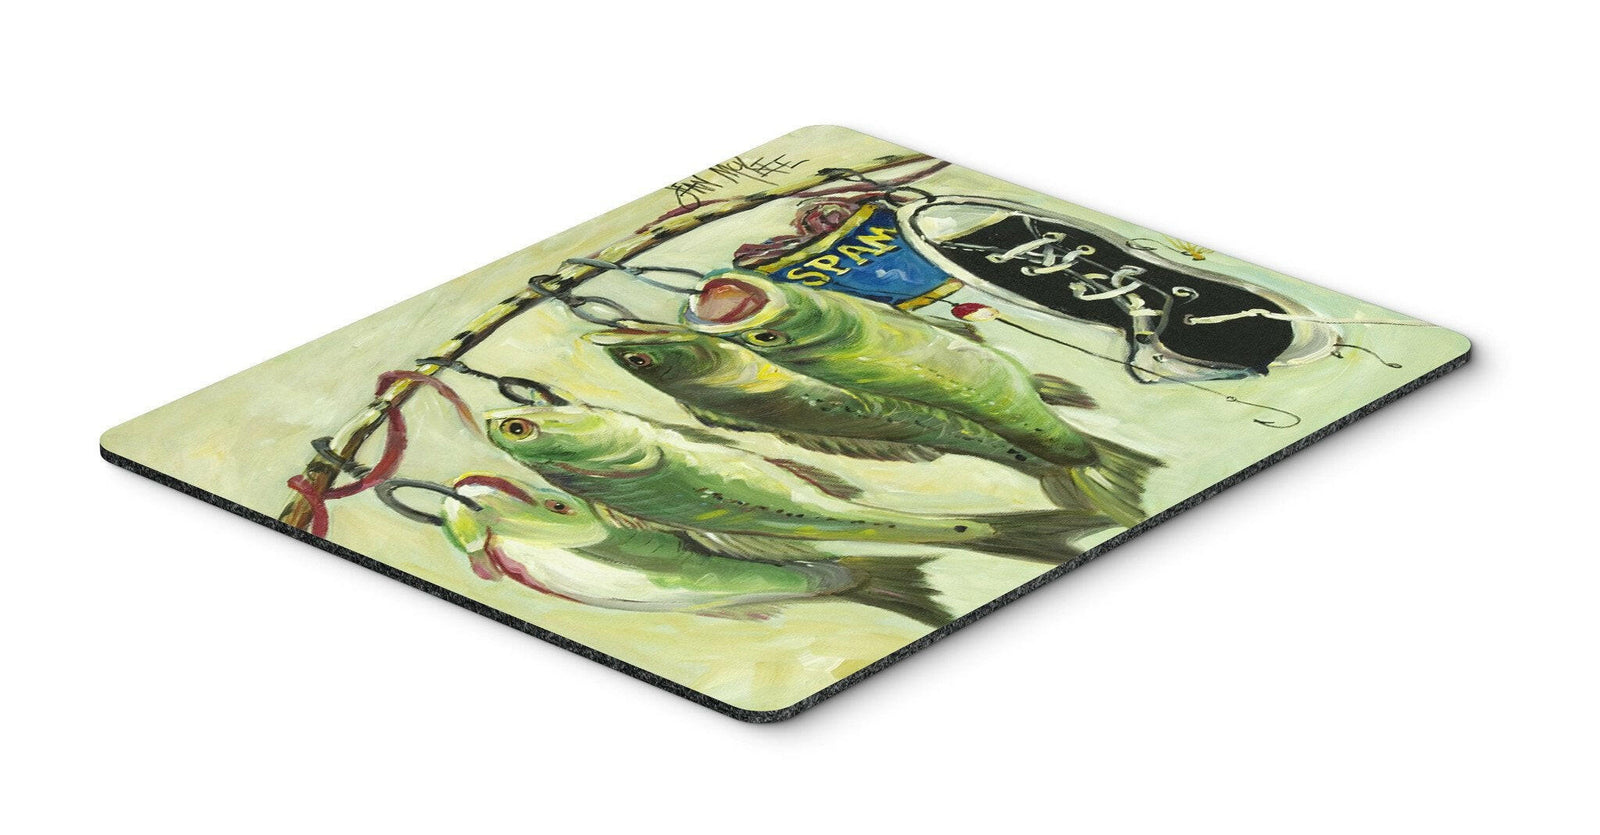 Recession Food Fish caught with Spam Mouse Pad, Hot Pad or Trivet JMK1113MP by Caroline's Treasures